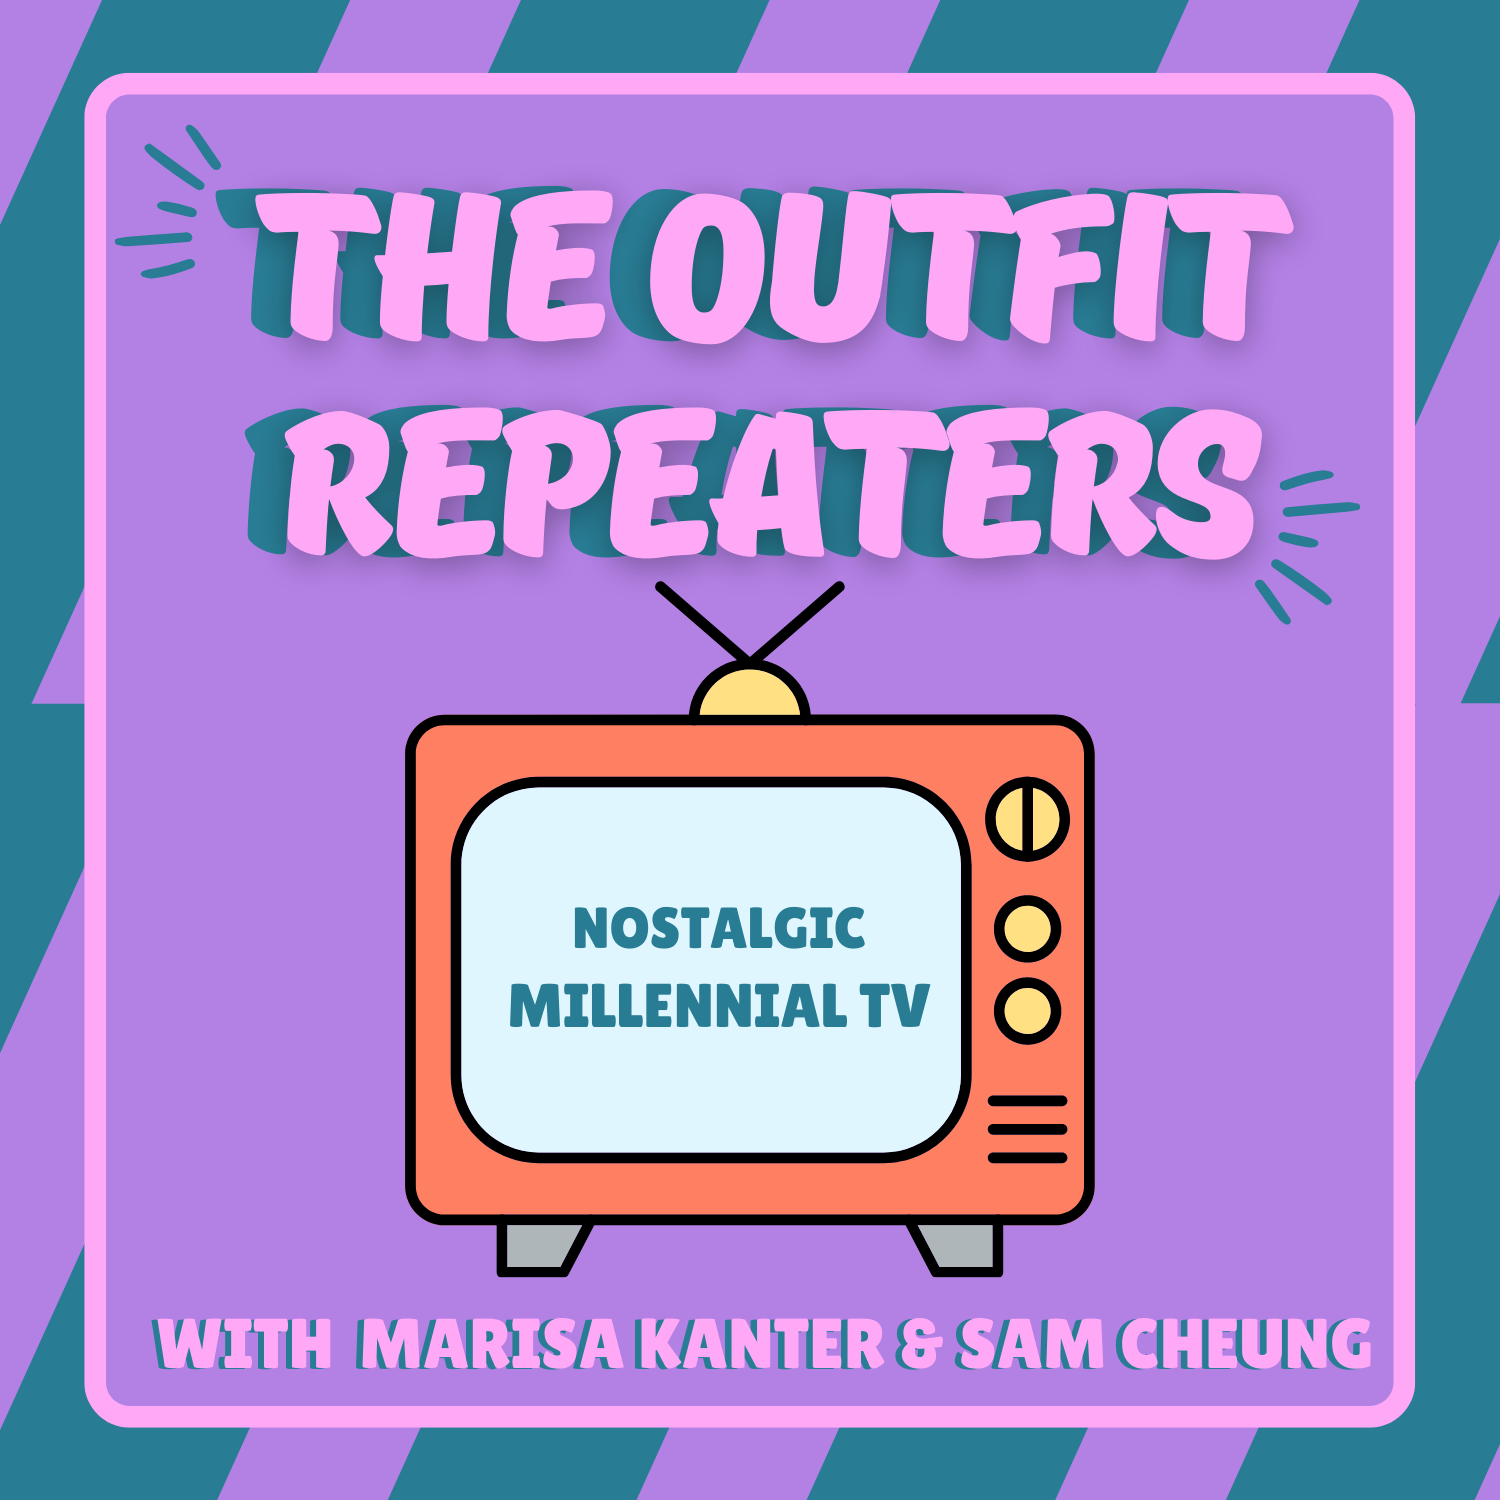 Artwork for podcast The Outfit Repeaters